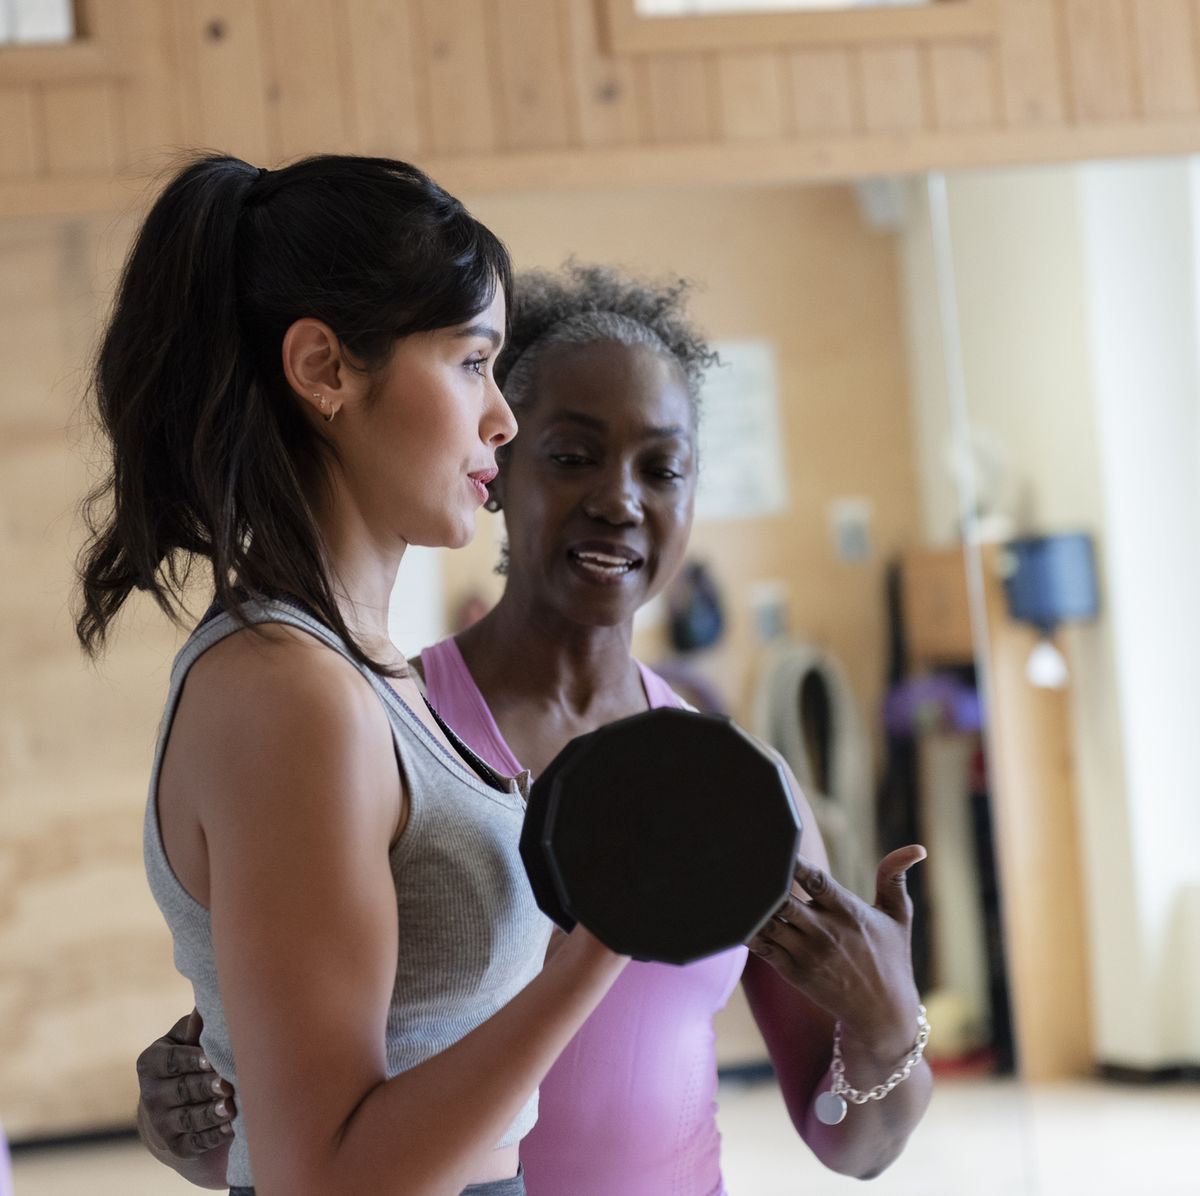 5 Things You Need to Know About Working with a Personal Trainer